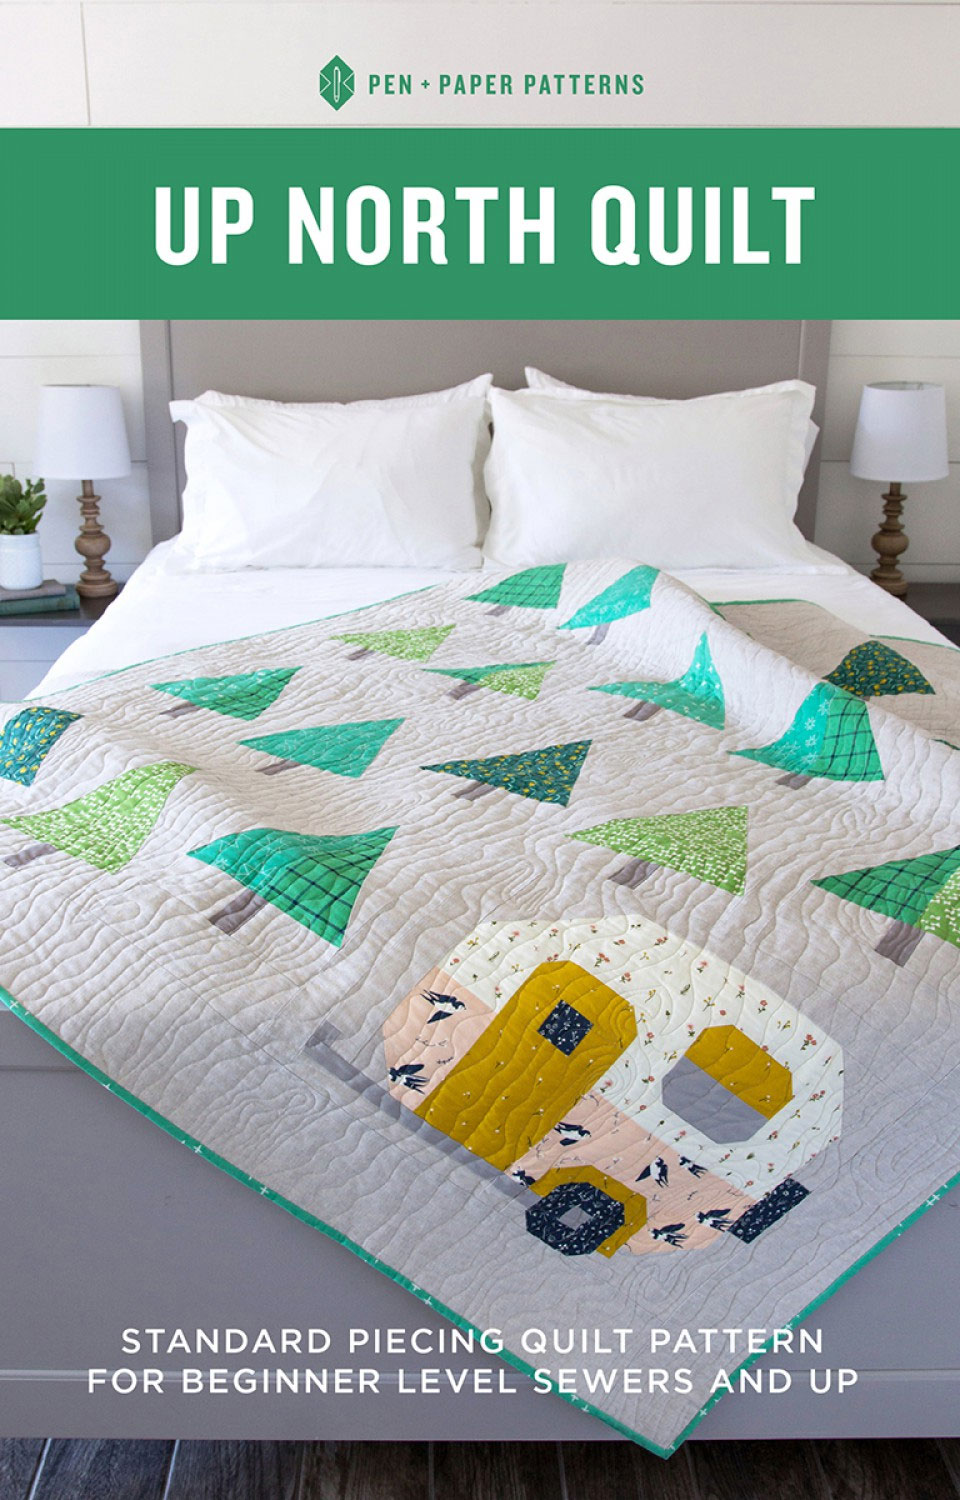 Up-North-quilt-sewing-pattern-from-Pen-plus-paper-patterns-front